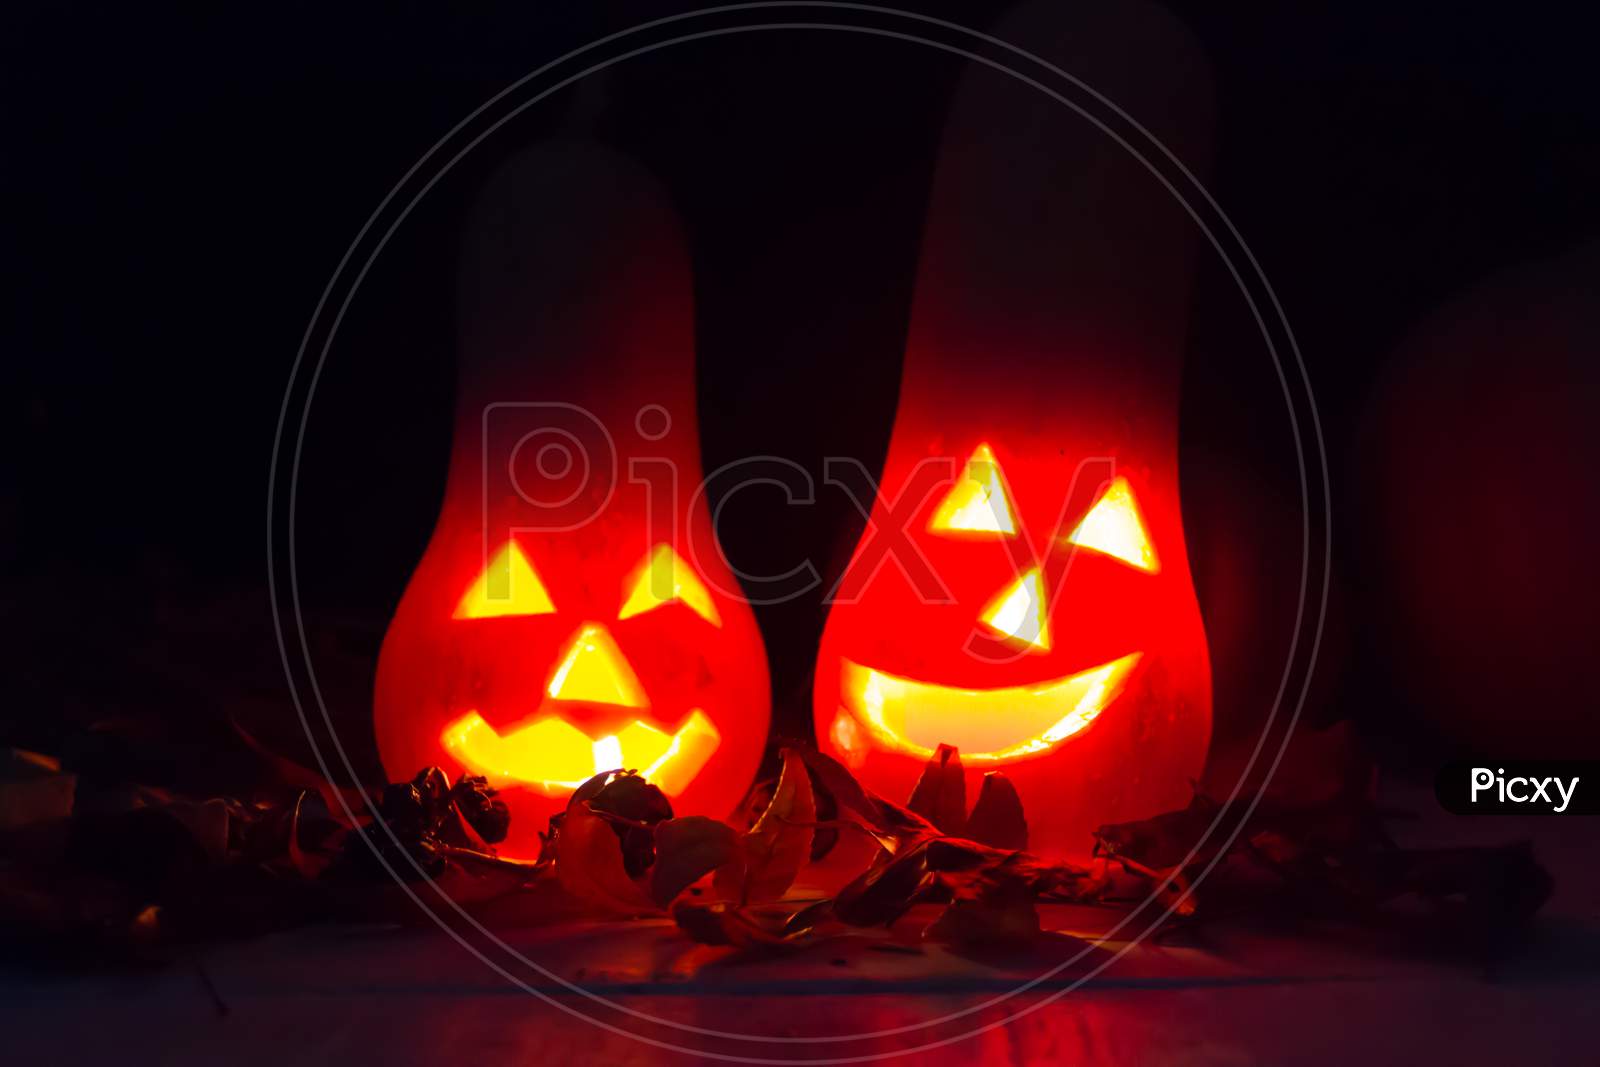 Halloween Candles And Pumpkins In The Dark